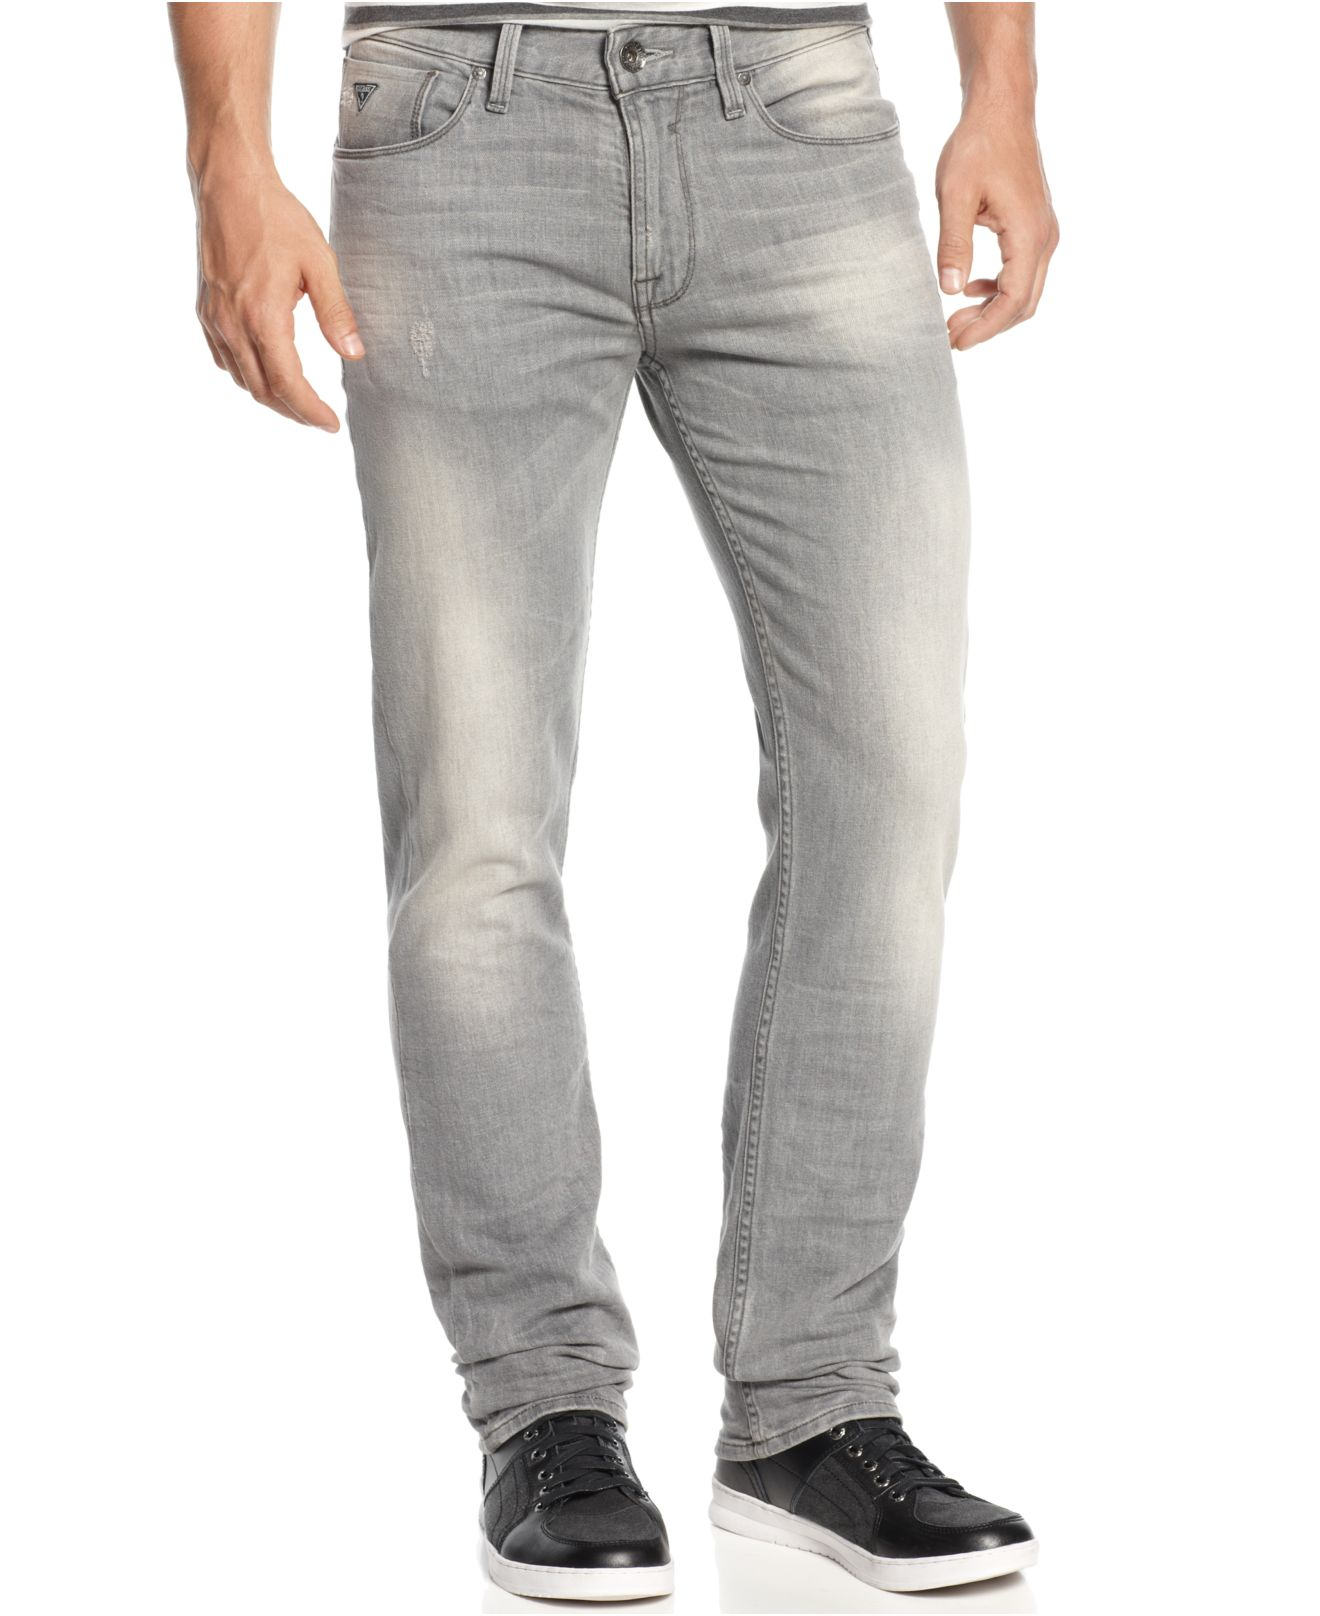 guess men's slim straight lonesomewash jeans in gray for